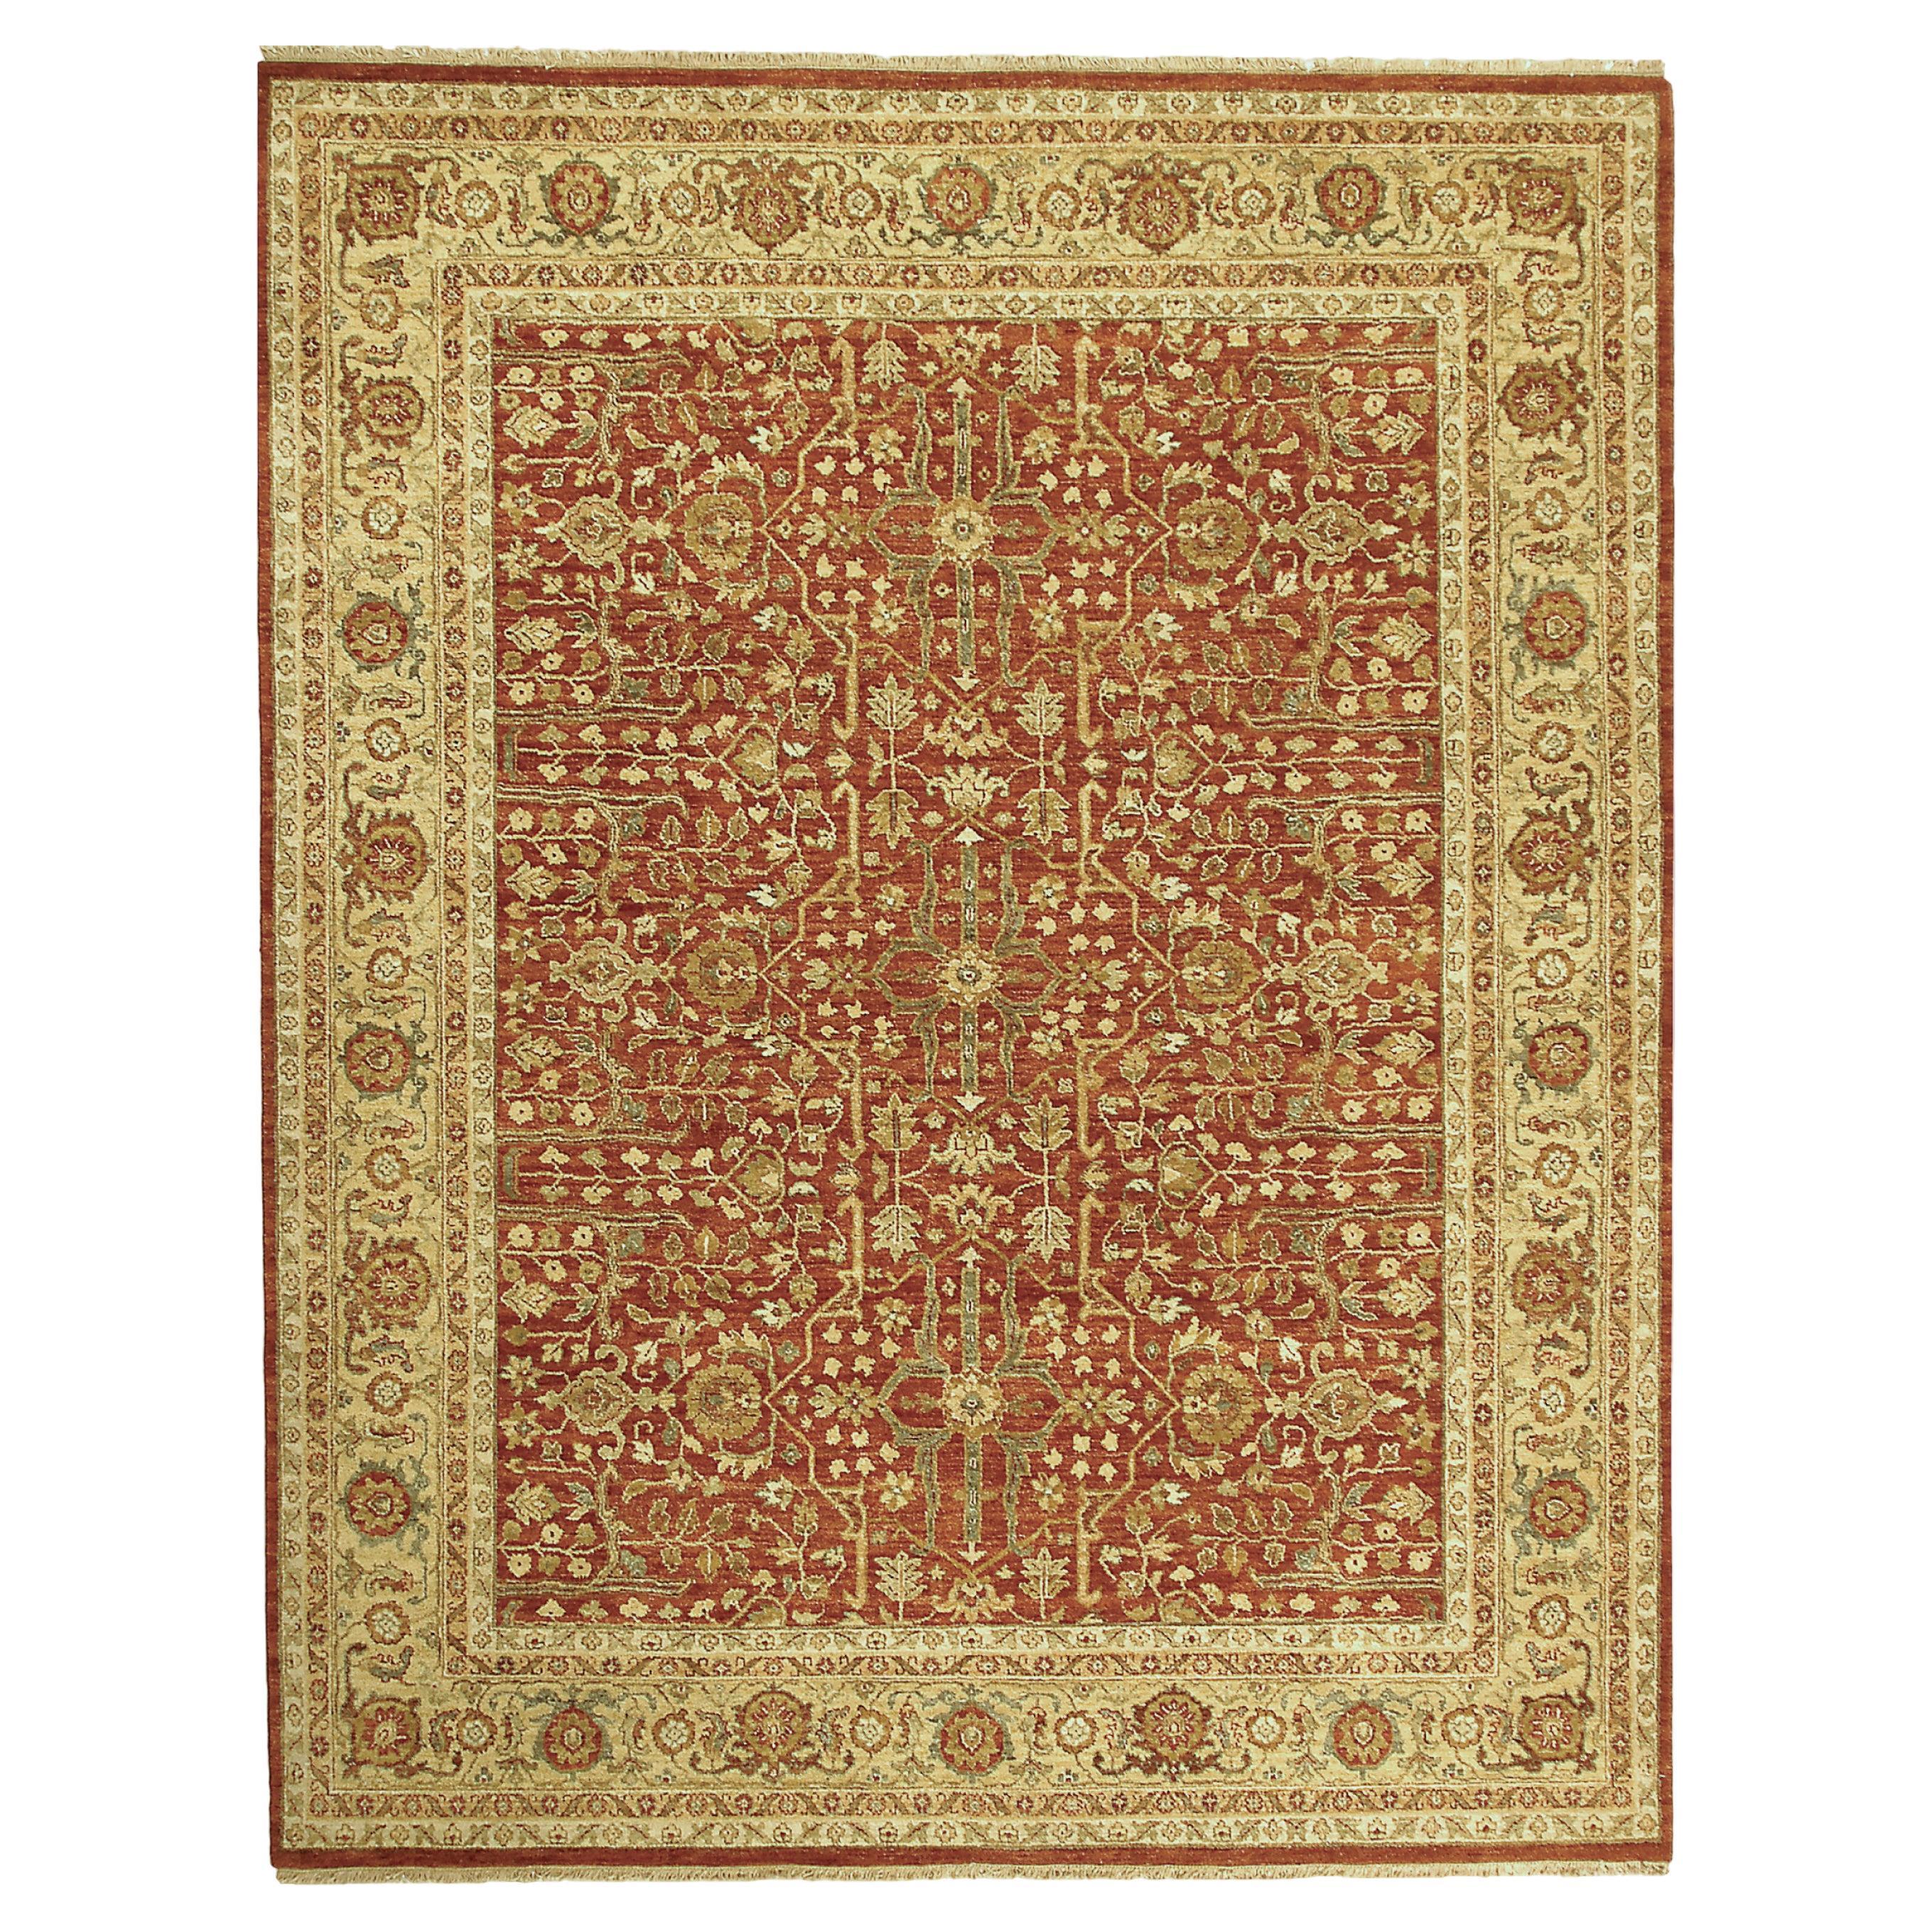 Luxury Traditional Hand-Knotted Ziegler Rust/Gold 12x24 Rug